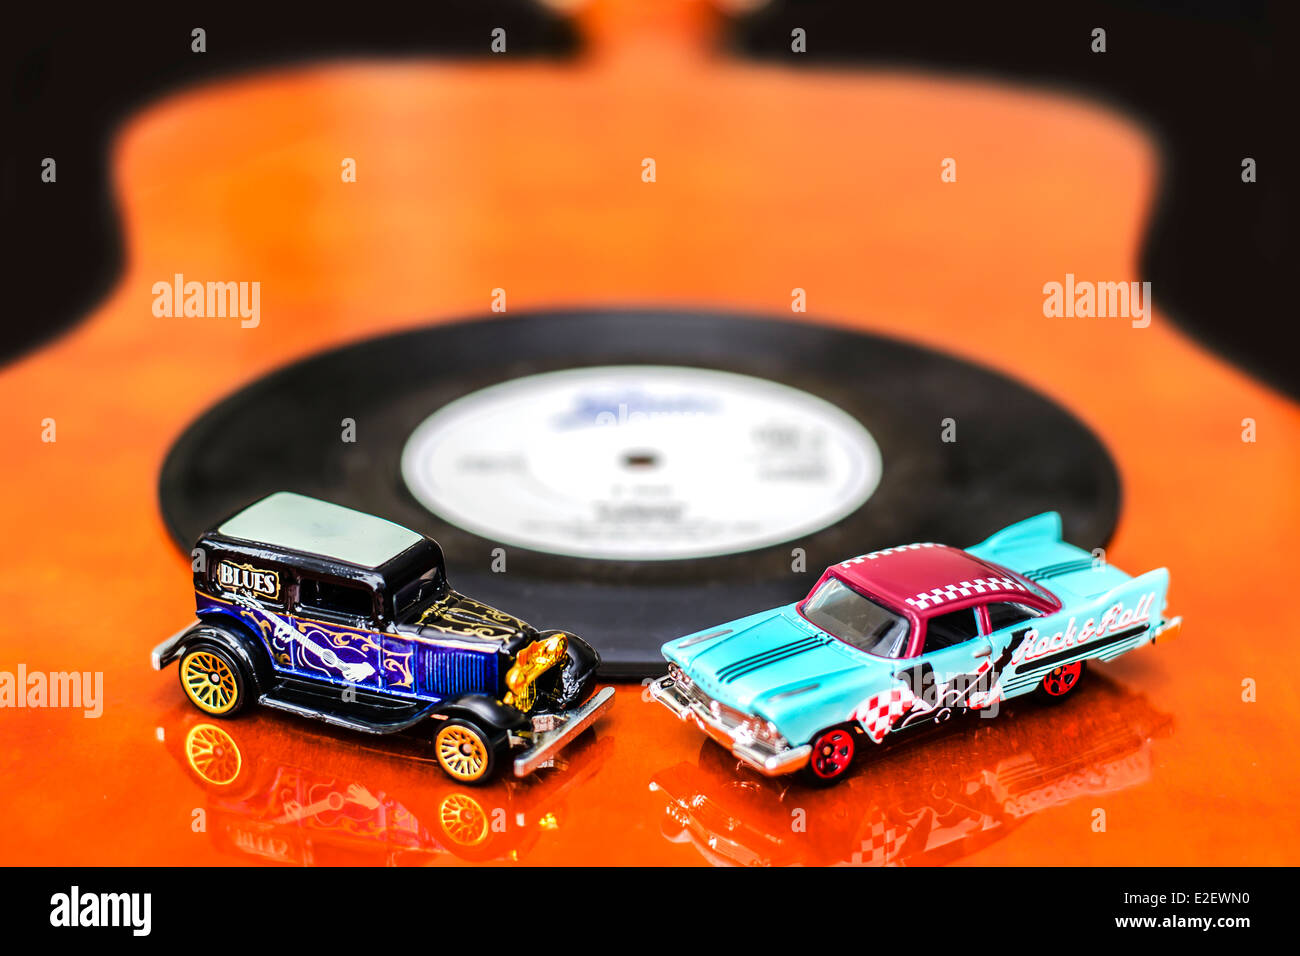 Blues and Rock Cars Miniature Toys on Guitar Stock Photo